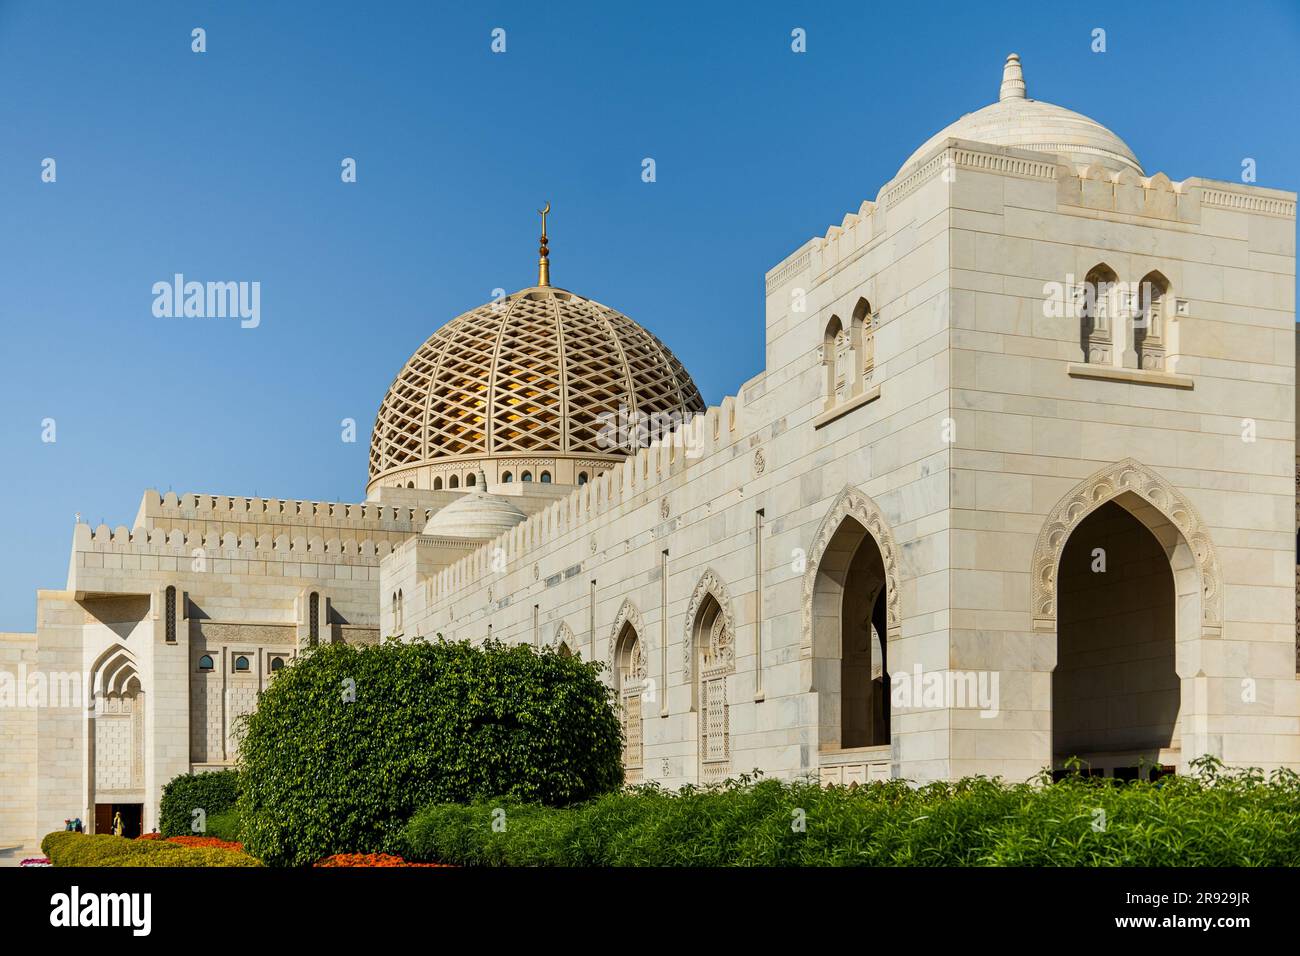 The grand mosque in oman Stock Photo